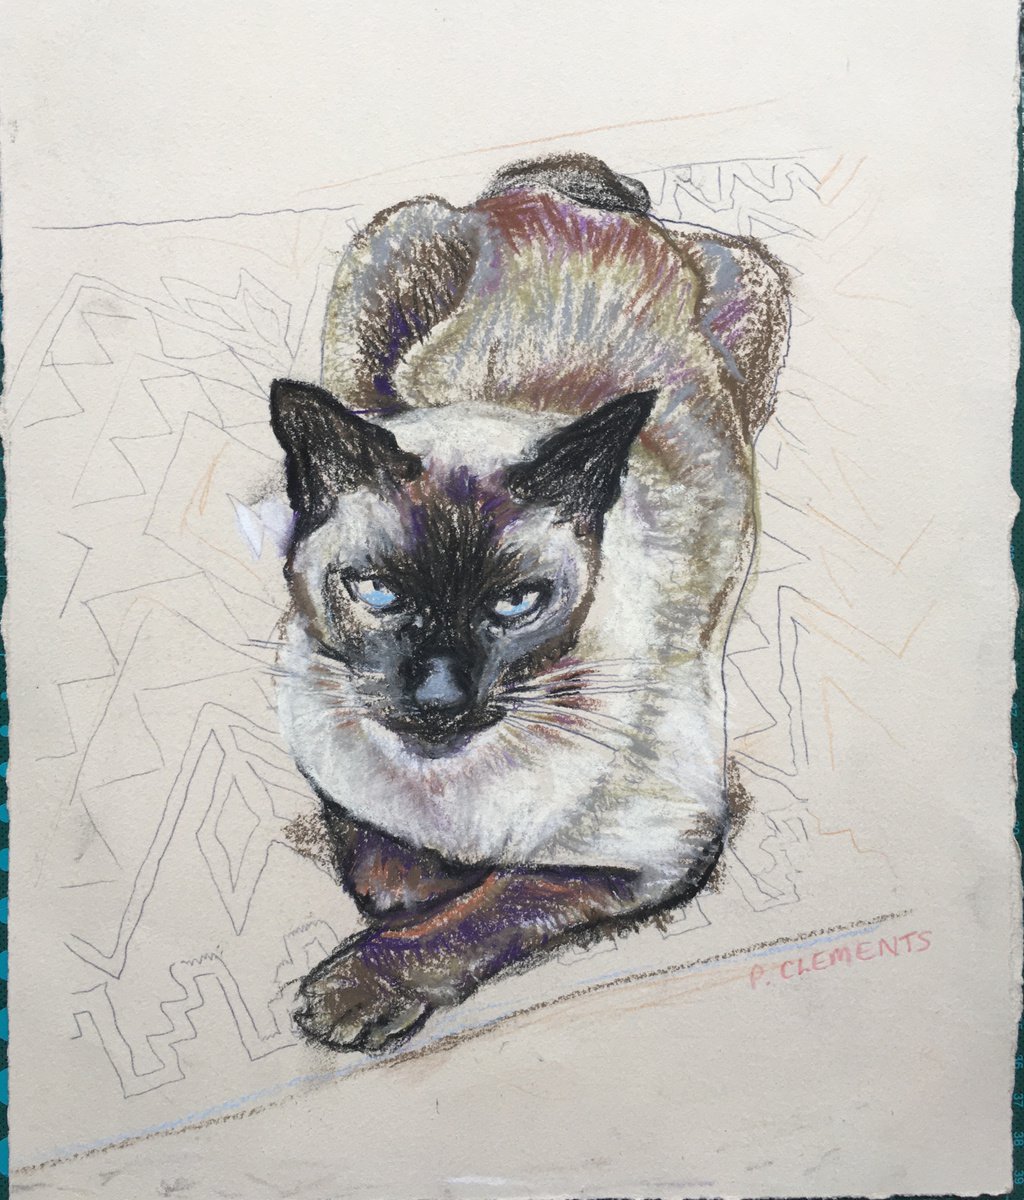 Bob the cat posing by Patricia Clements